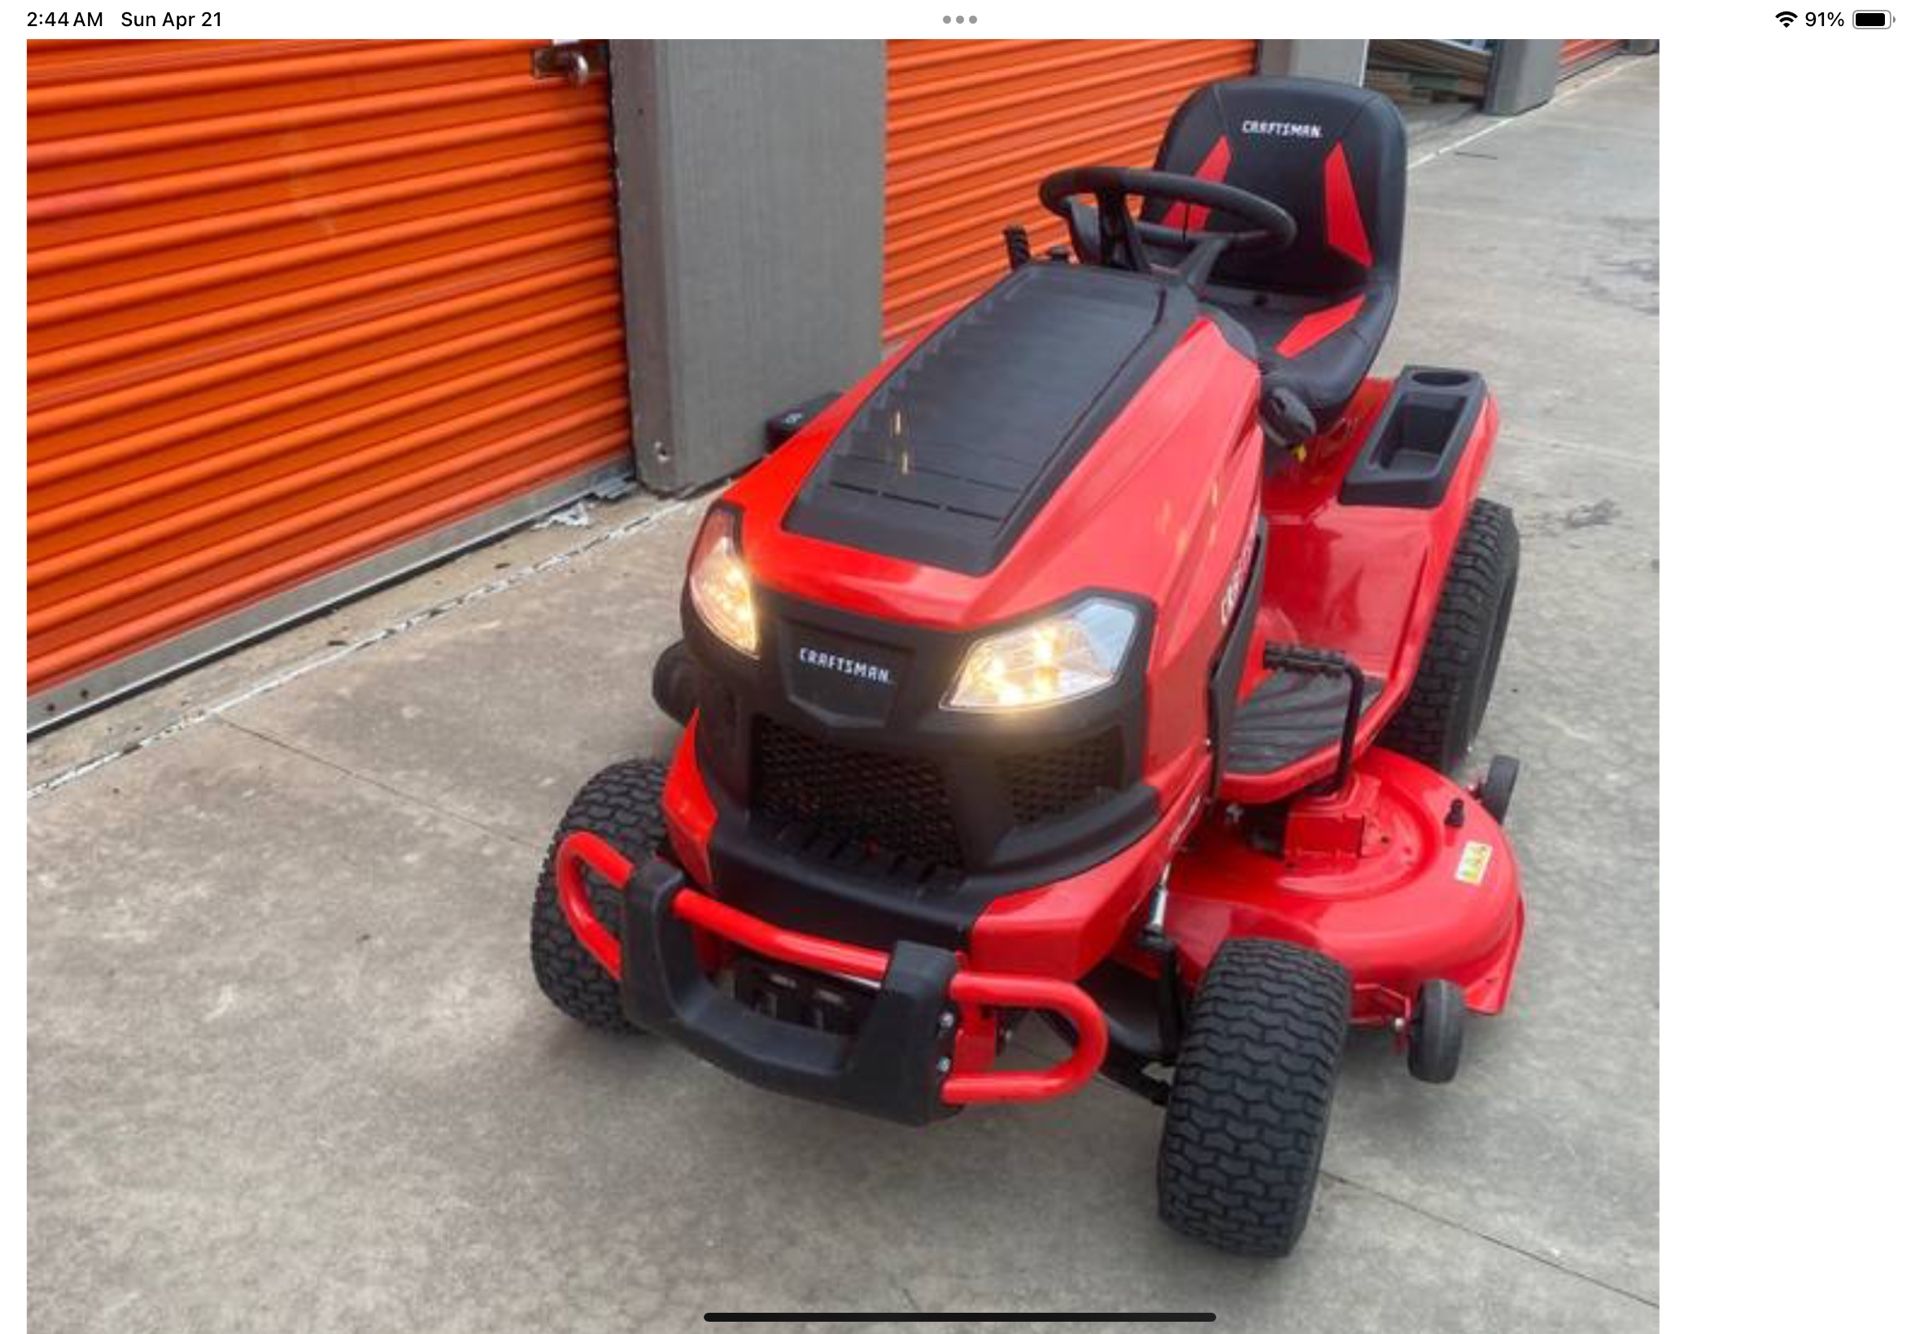 CRAFTSMAN T2400 Turn Tight 46-in 23-HP V-twin Gas Riding Lawn Mower Has Only 10 Hours,,$1850.00 O.B.O.